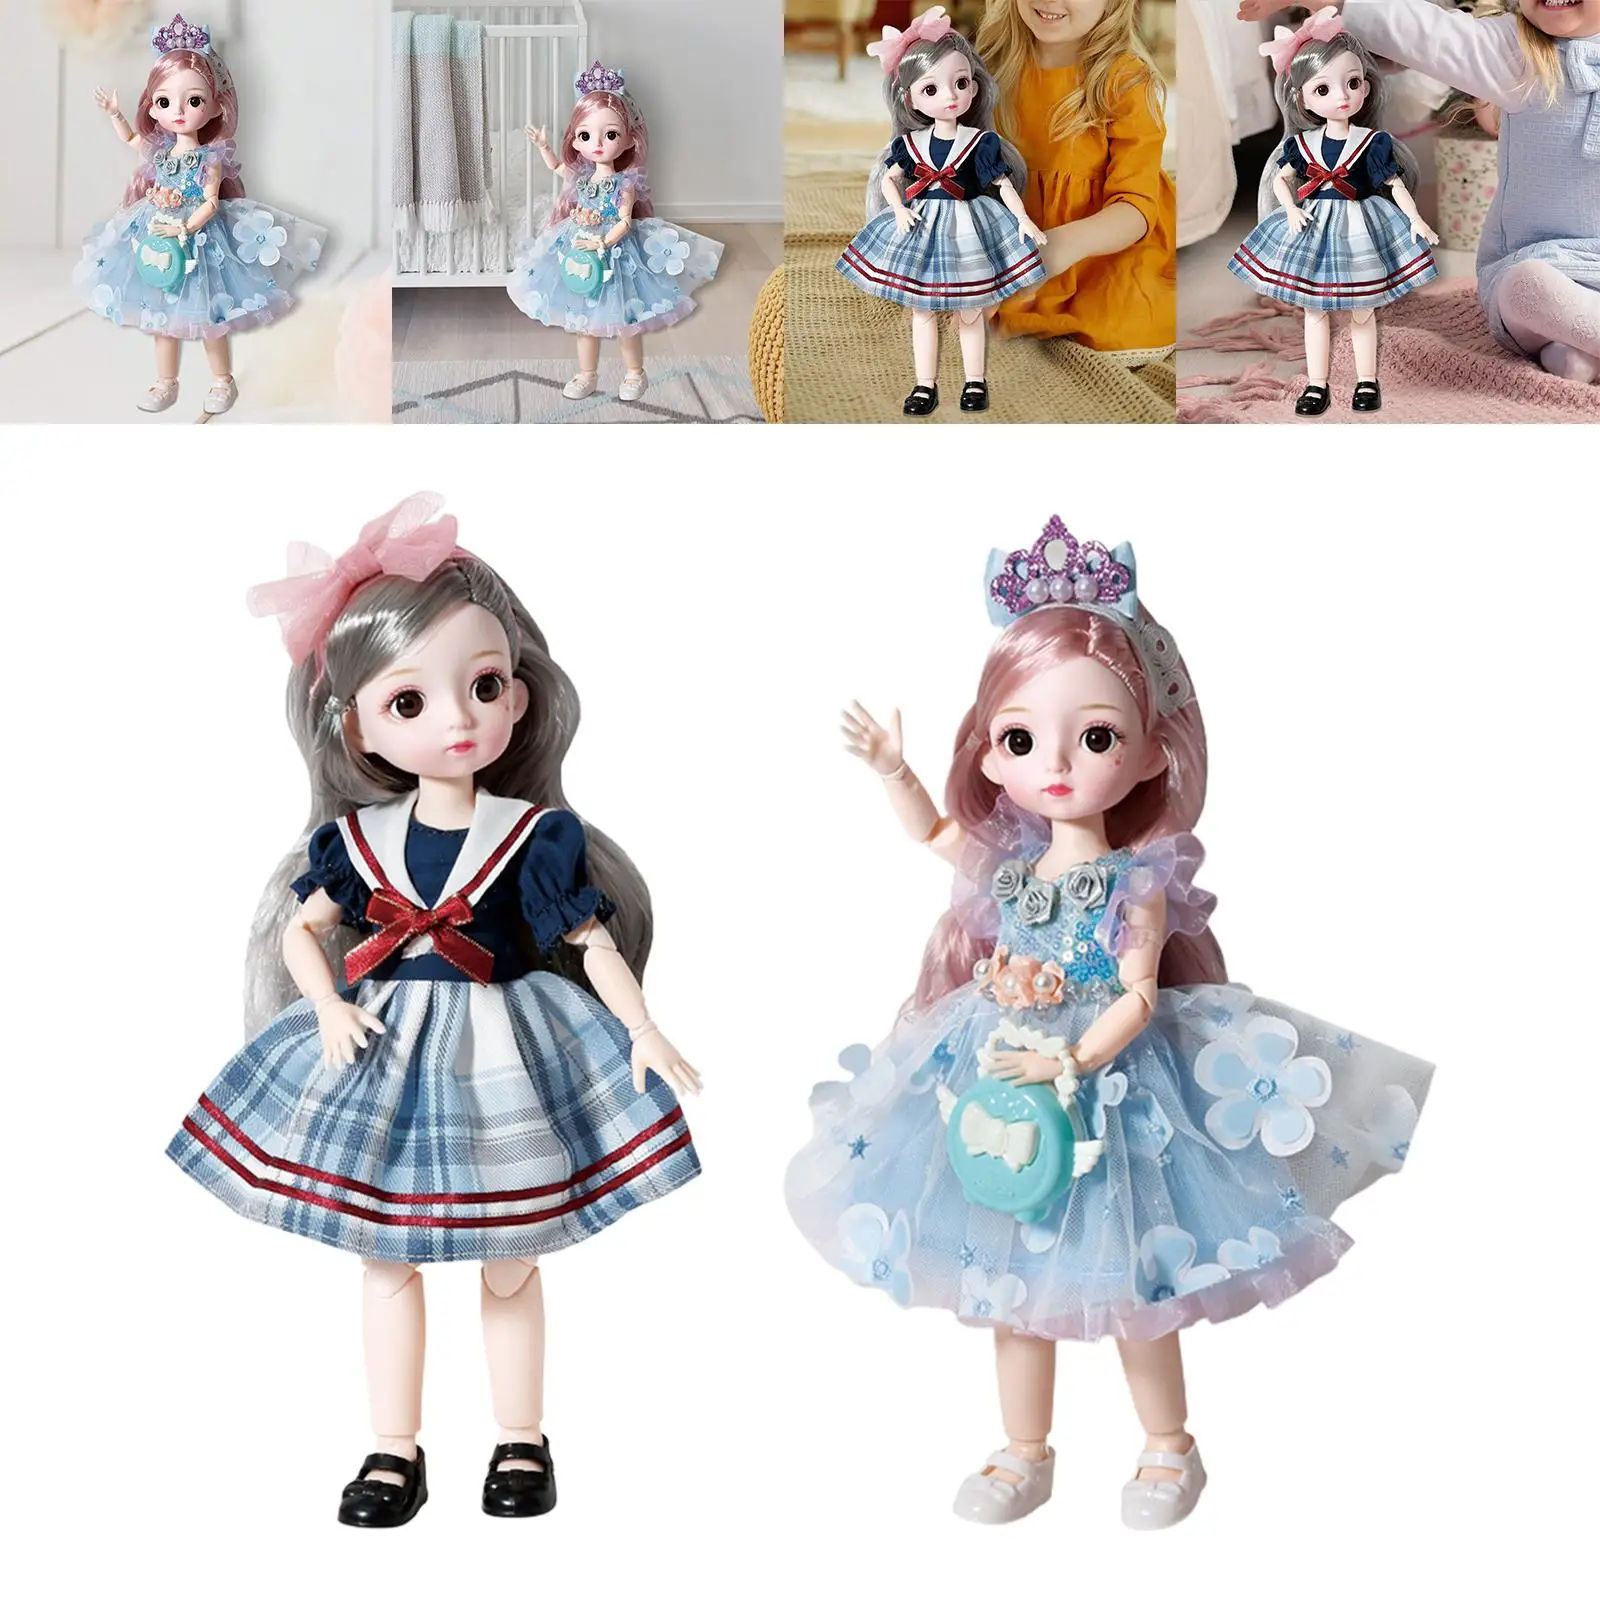 1/6 31cm Fashion Doll Fashion Outfits Smooth Hair 3D Eyes Makeup 23 Flexible Joints Princess Doll Adorable for Birthday Gift Toy